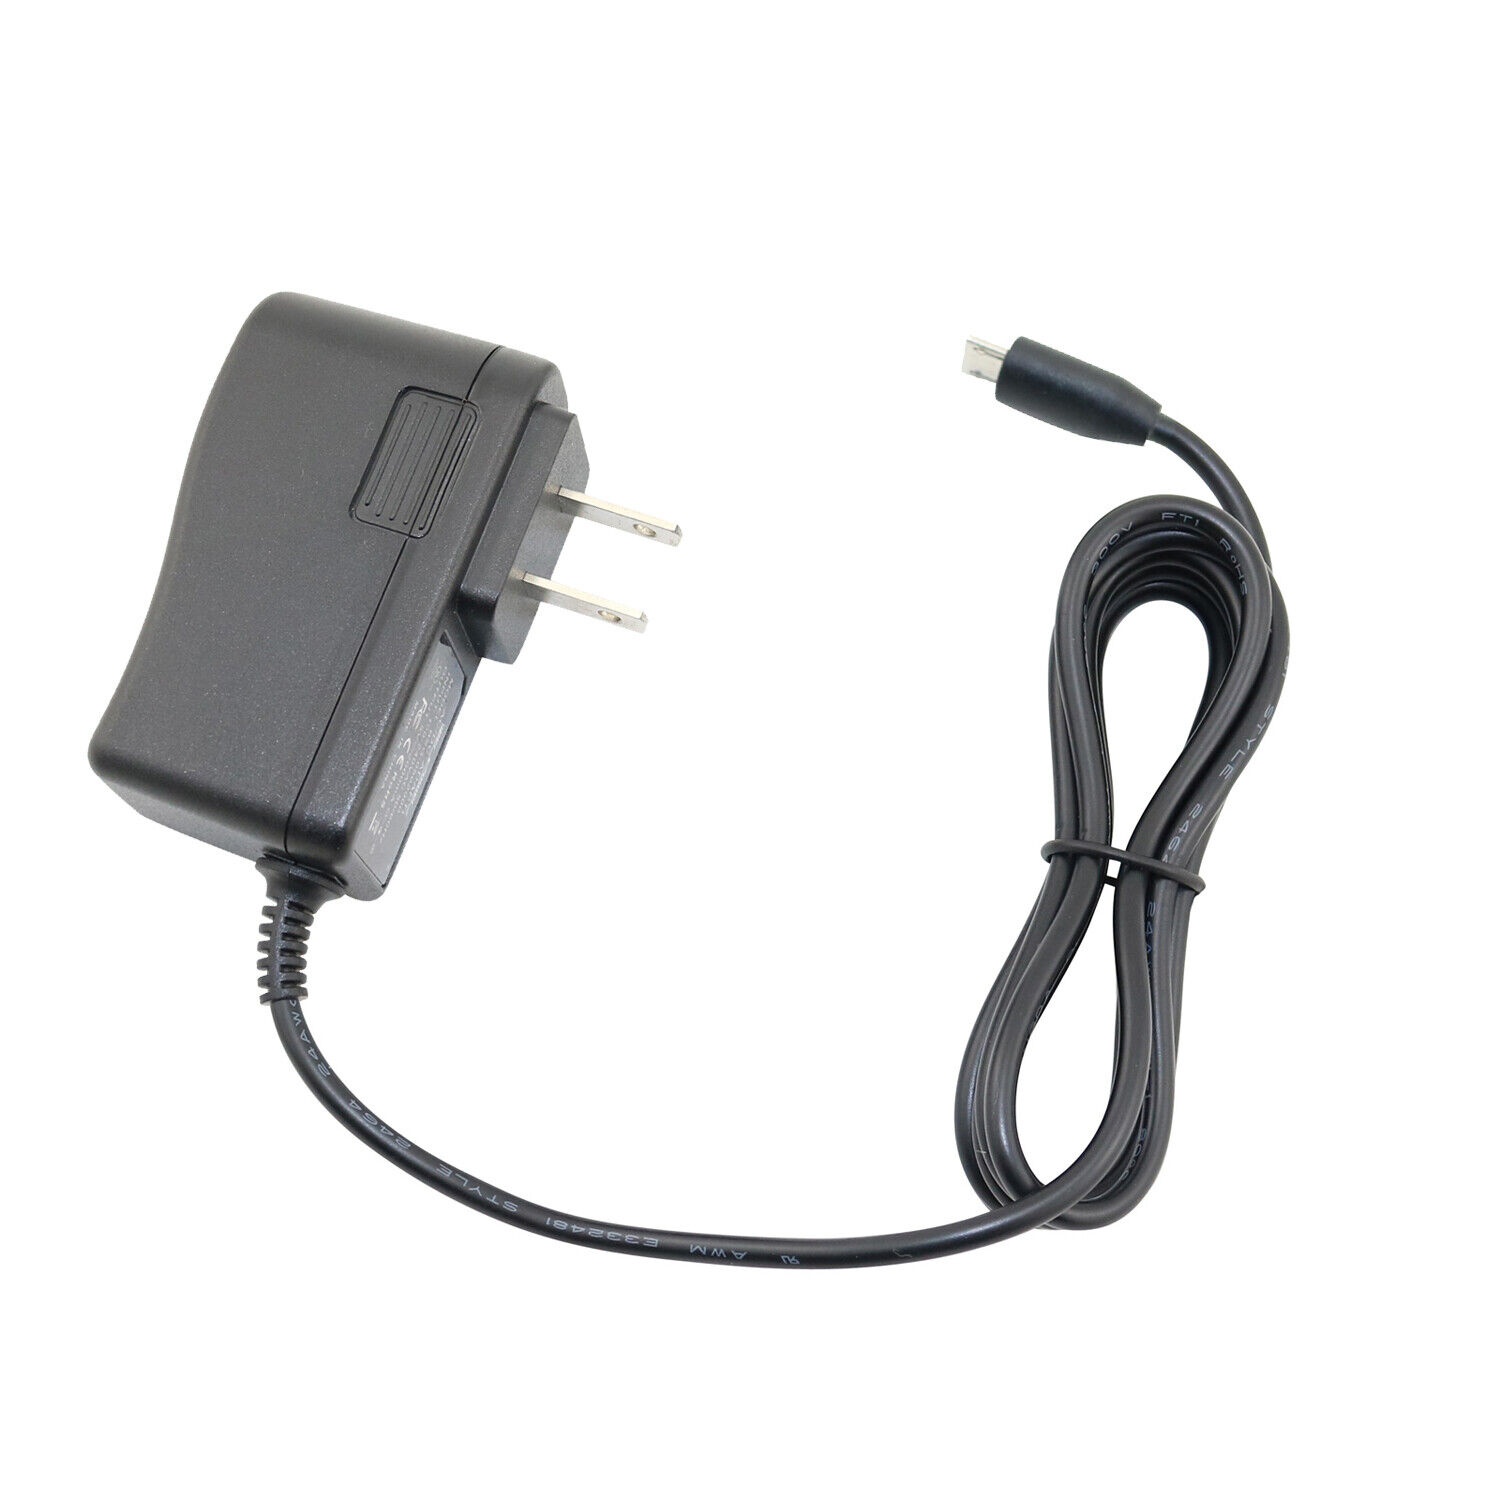 *Brand NEW* Charger for Fujifilm Instax Share SP-2 SP-3 AC/DC Adapter Power Supply Cord